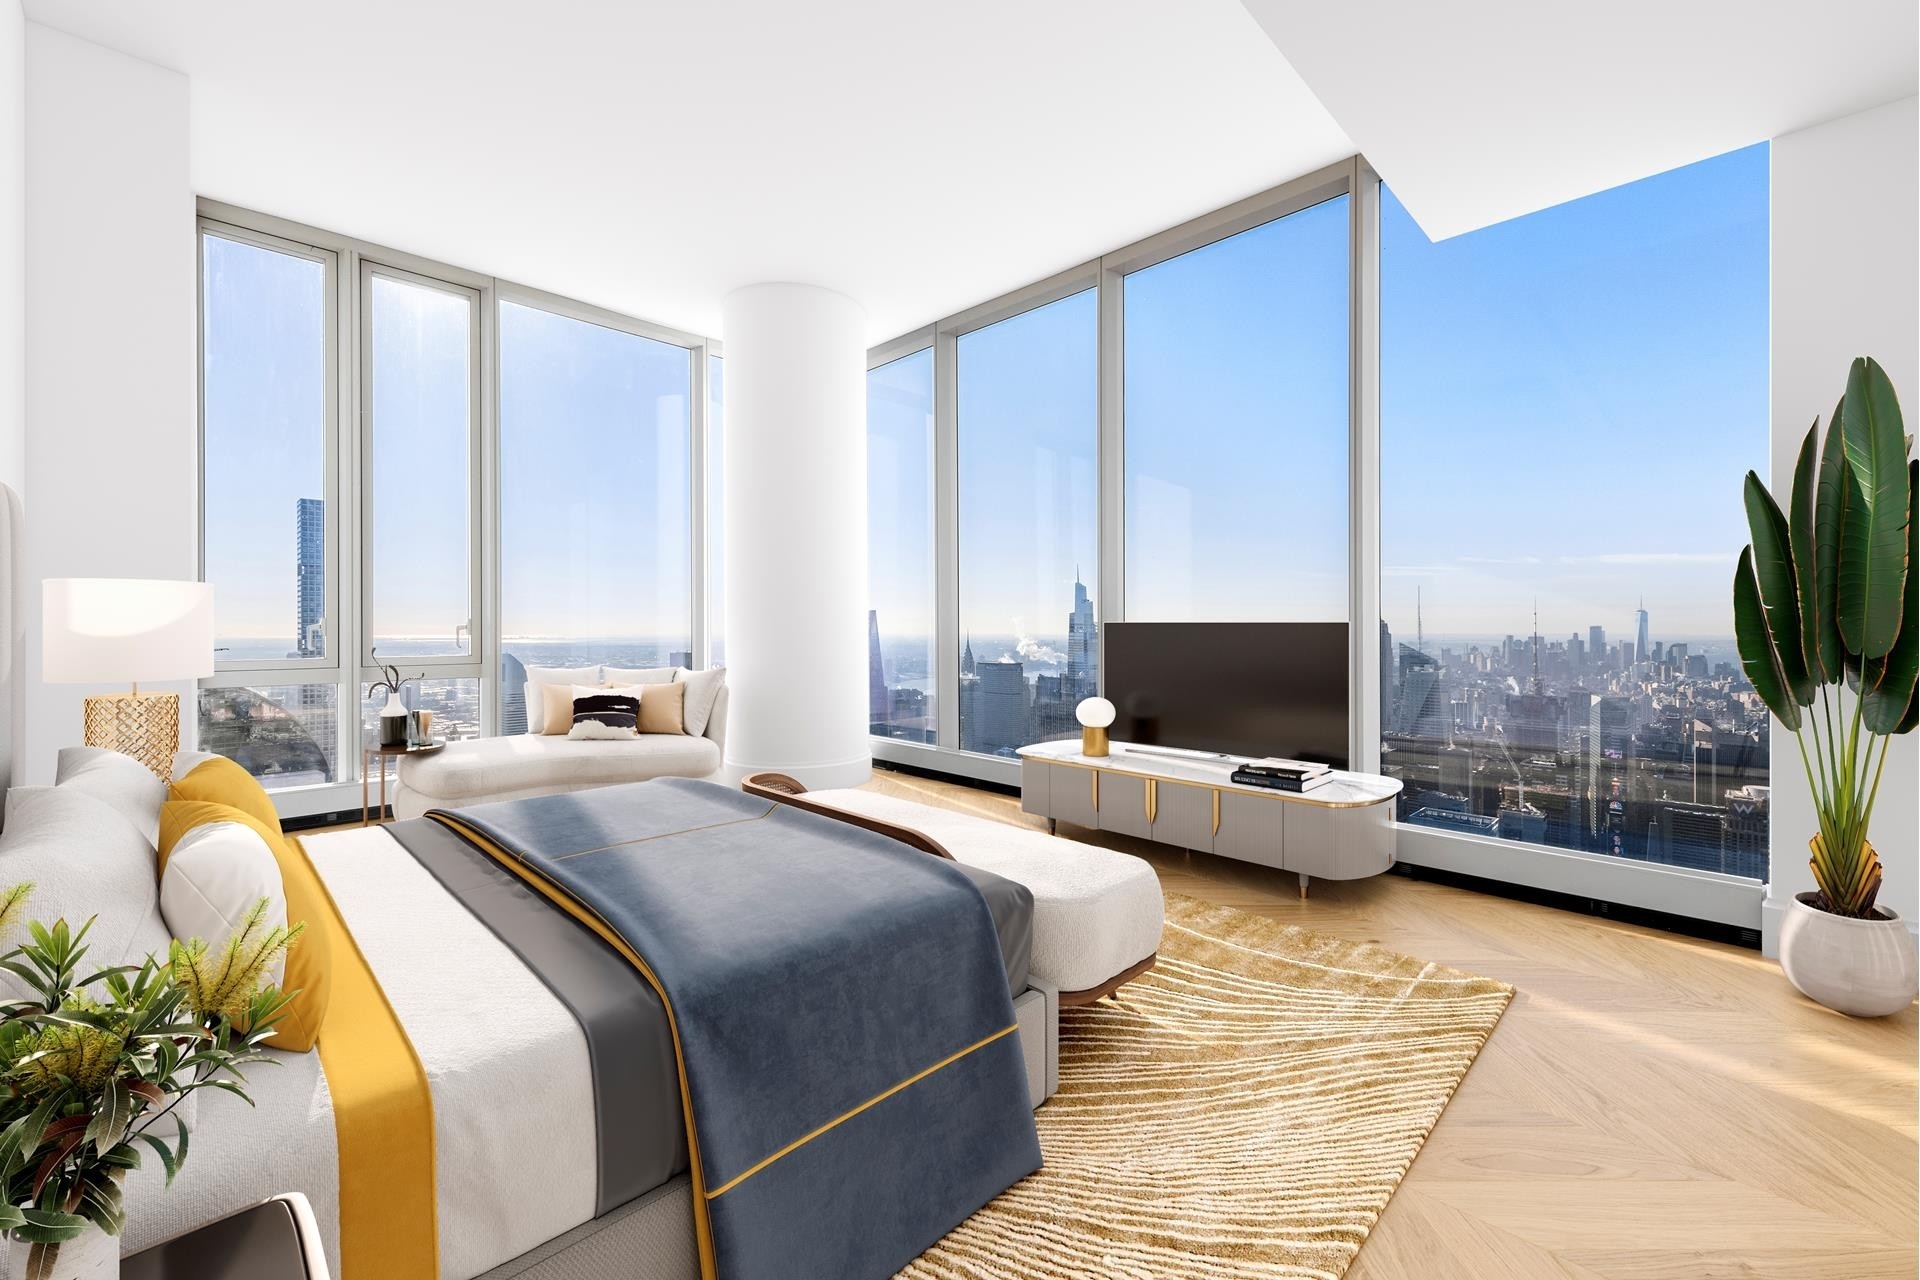 Condominium for Sale at Central Park Tower, 217 W 57TH ST , 91E Midtown West, New York, New York 10019